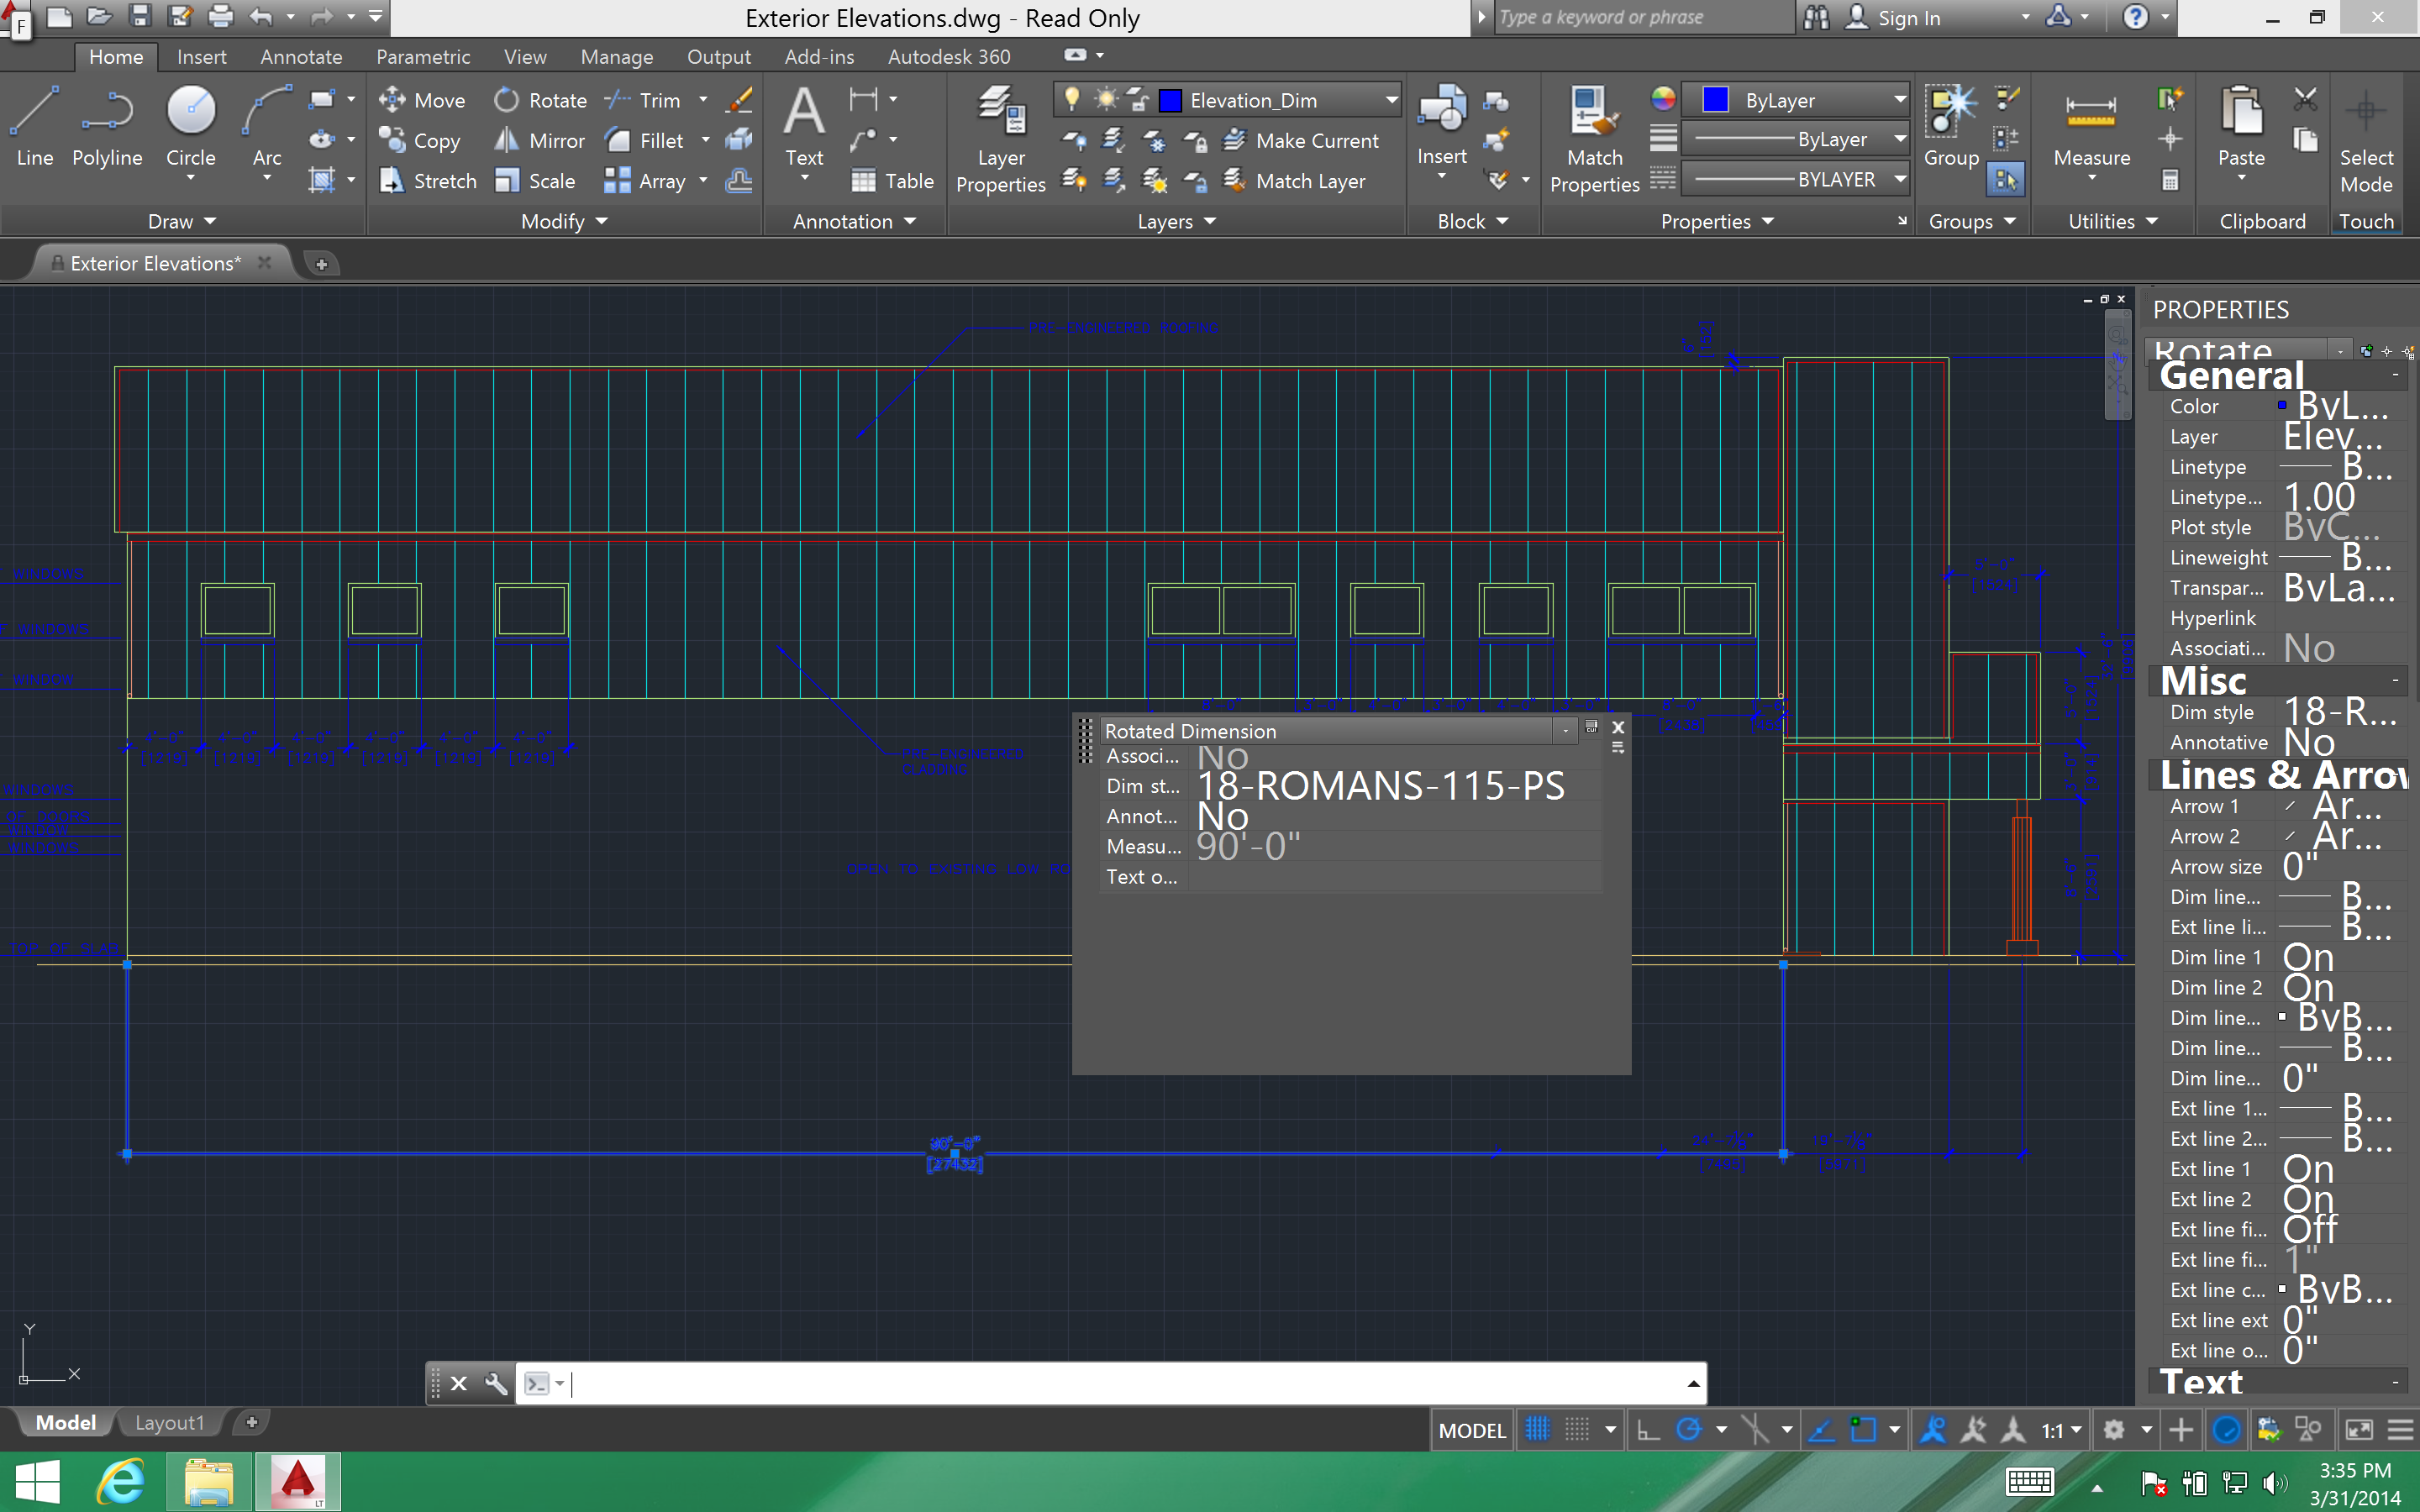 autocad 2003 free download full version with crackers